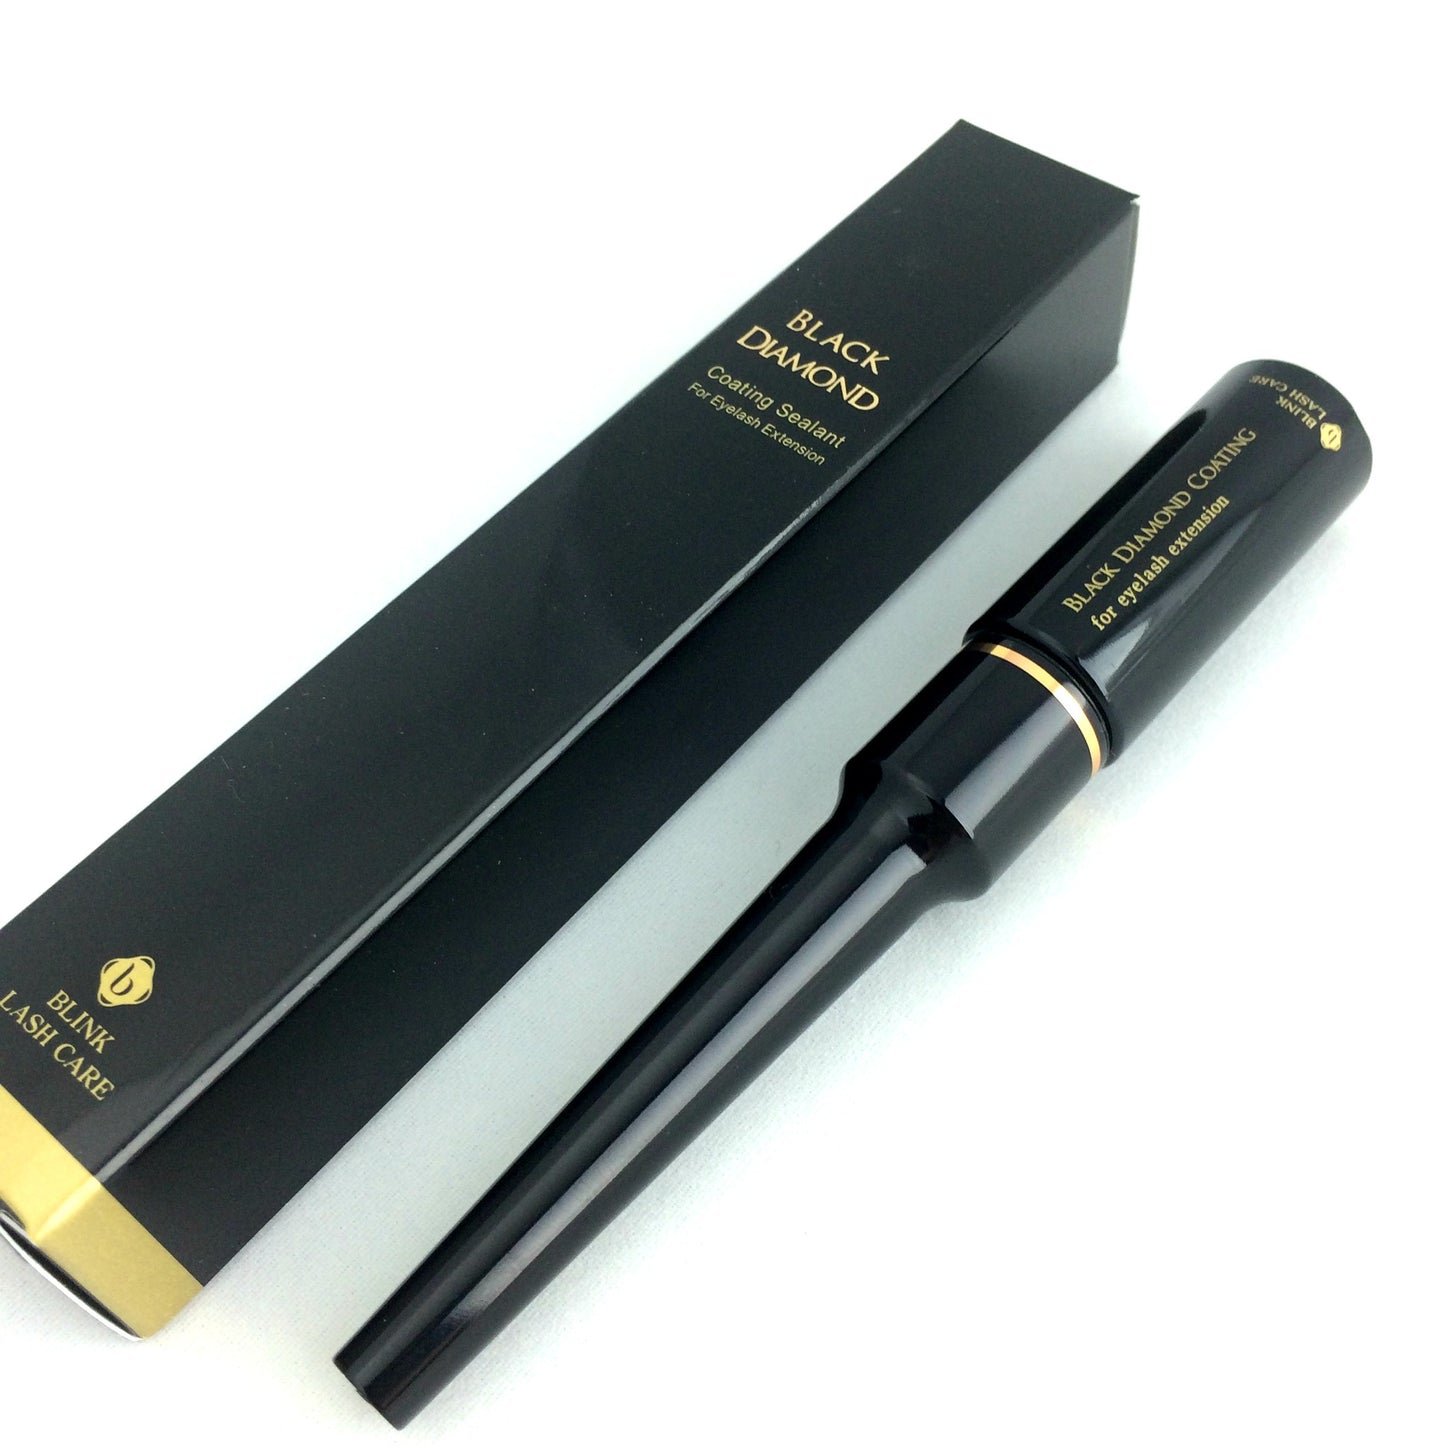 Picture of the packaging and actual bottle of Blink Black Diamond Eyelash Extension Sealant. Black with Gold Lettering